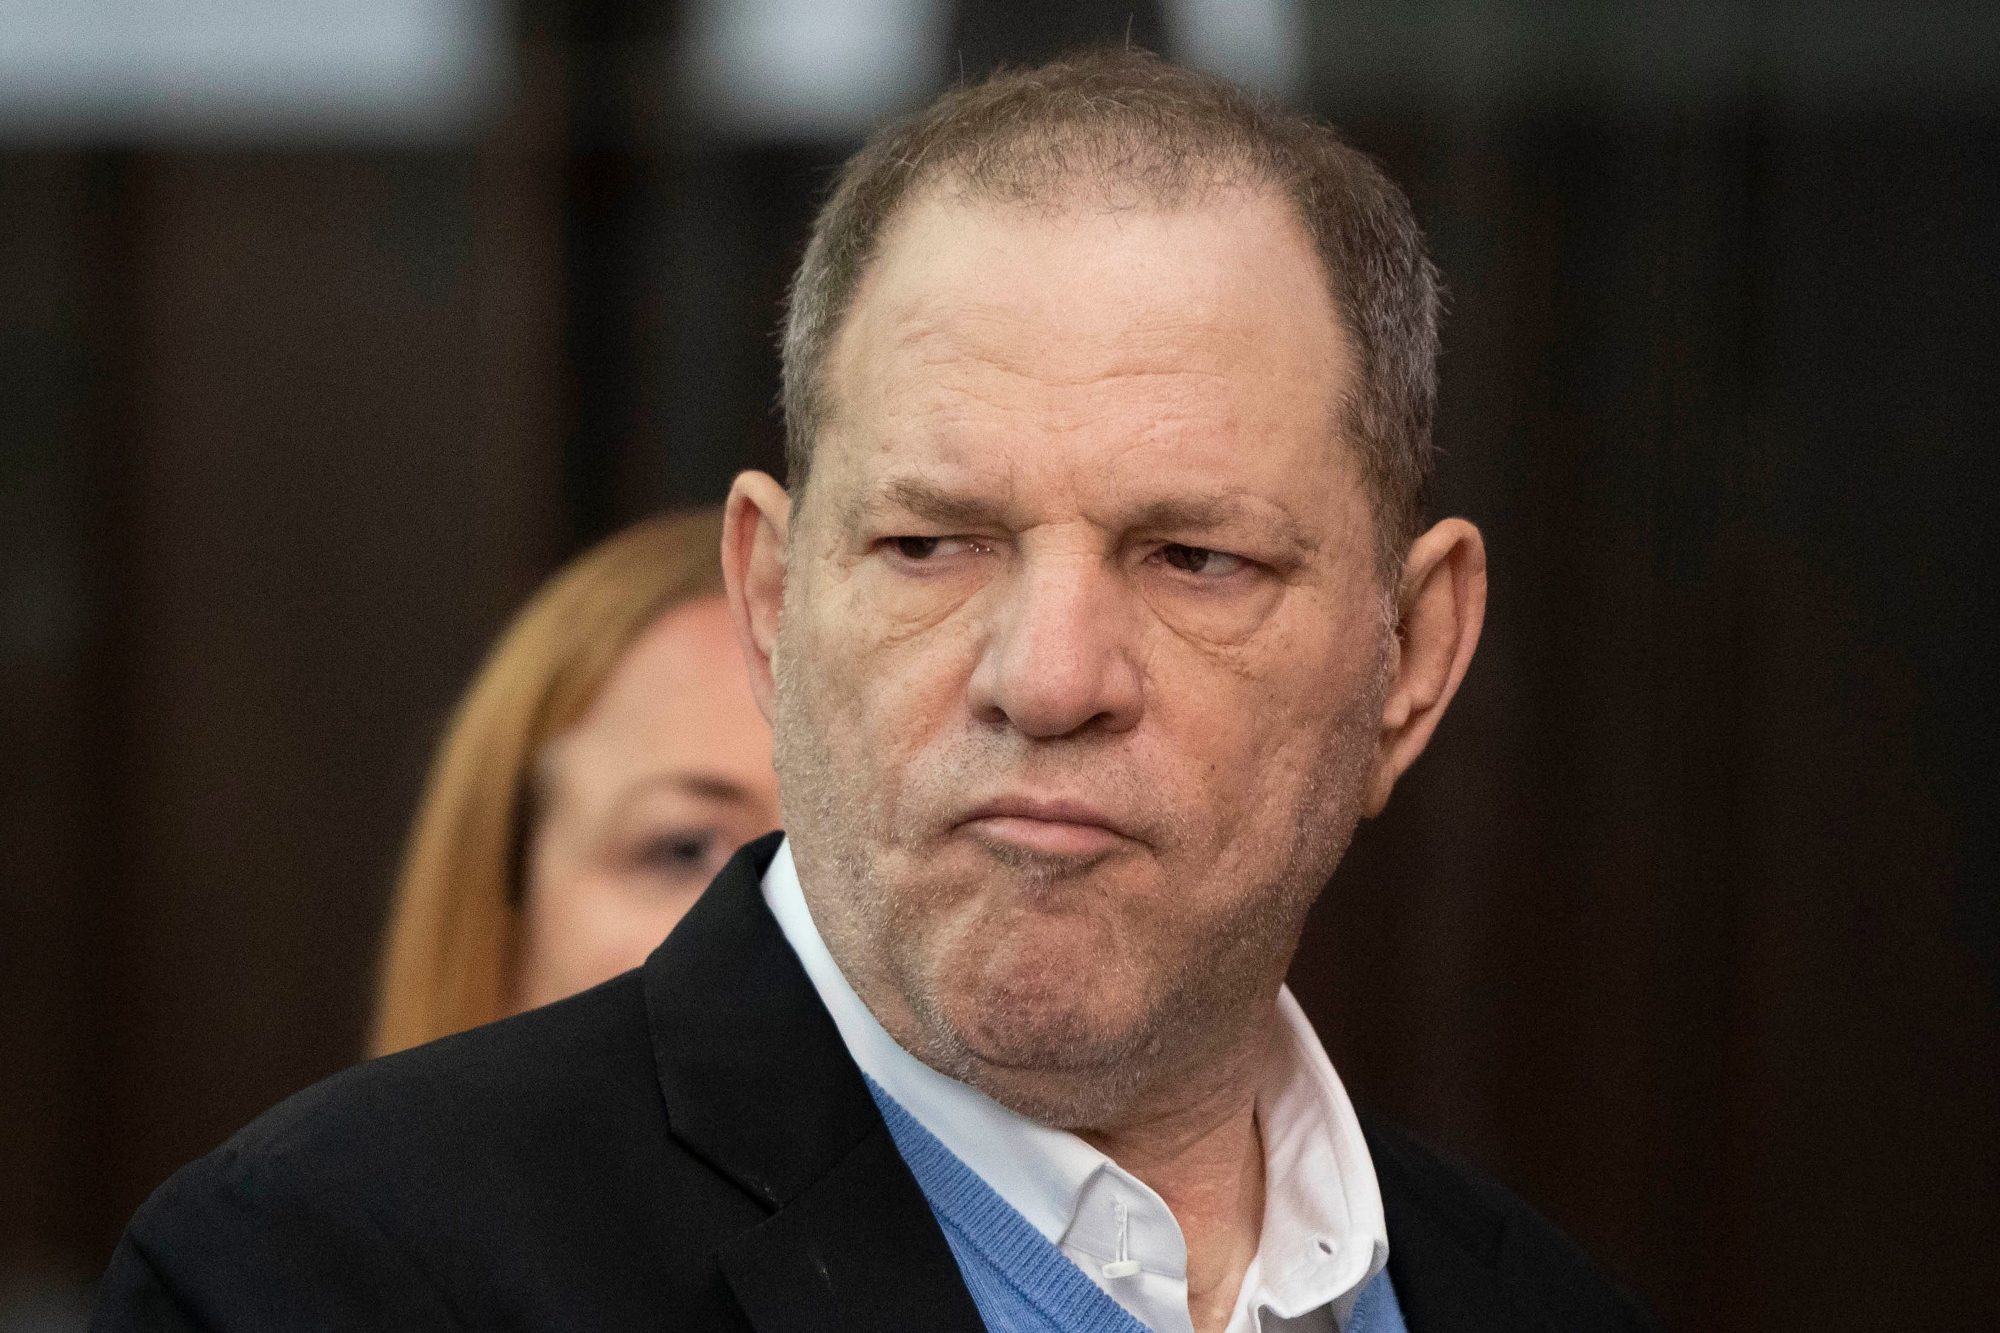 Harvey Weinstein listens during a court proceeding in New York on Friday, May 25, 2018. Weinstein was arraigned Friday on rape and other charges in the first criminal prosecution to result from the wave of allegations against him that sparked a national reckoning over sexual misconduct. (Steven Hirsch/New York Post via AP, Pool) Sexual Misconduct Weinstein